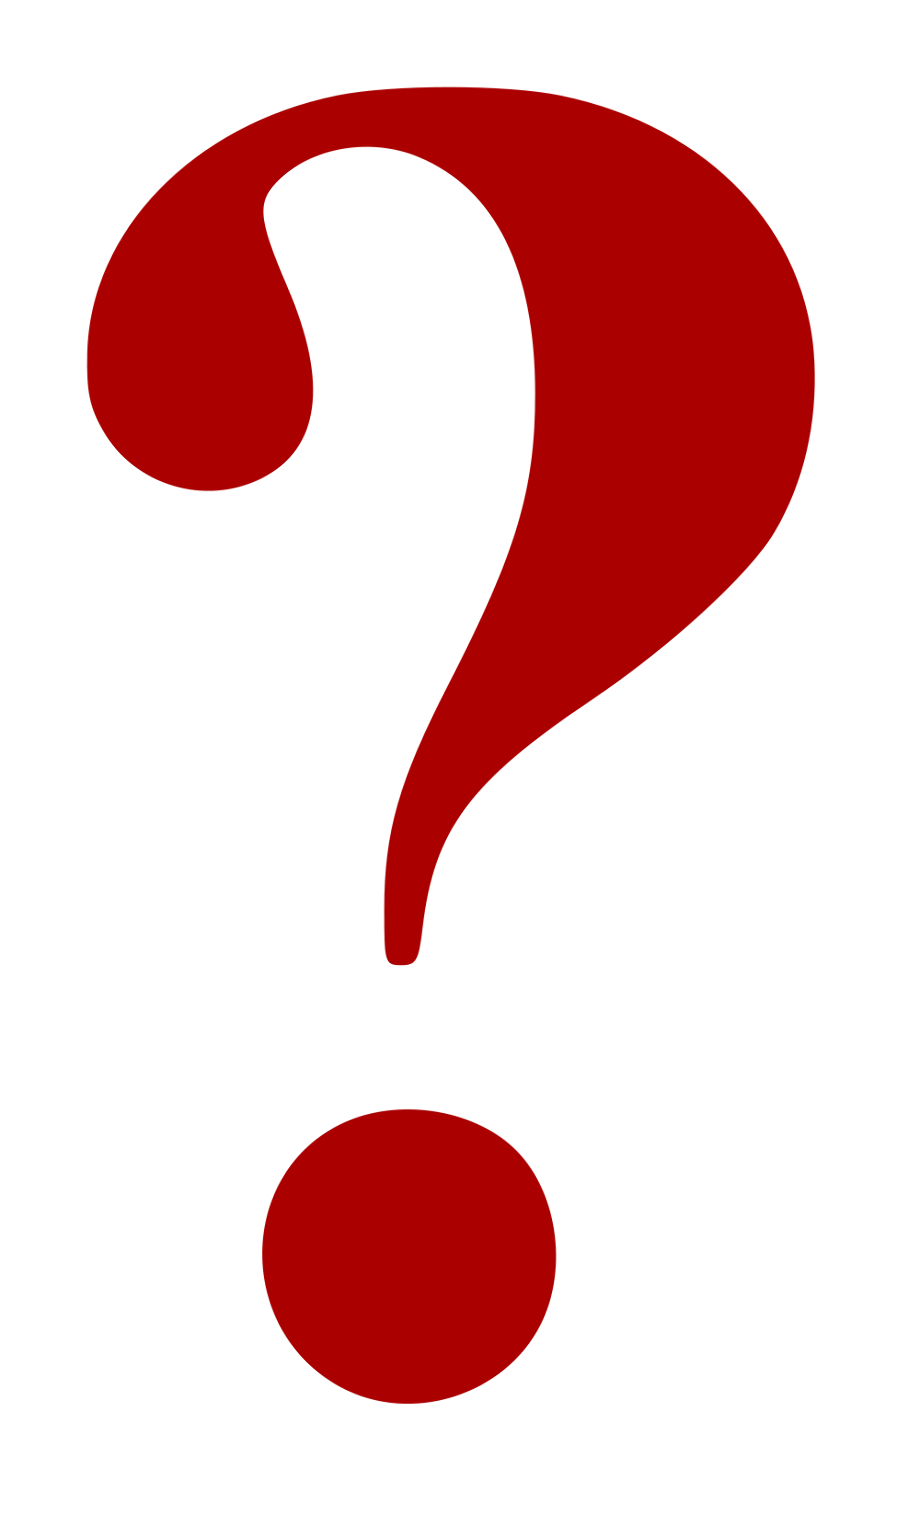 question mark clipart red